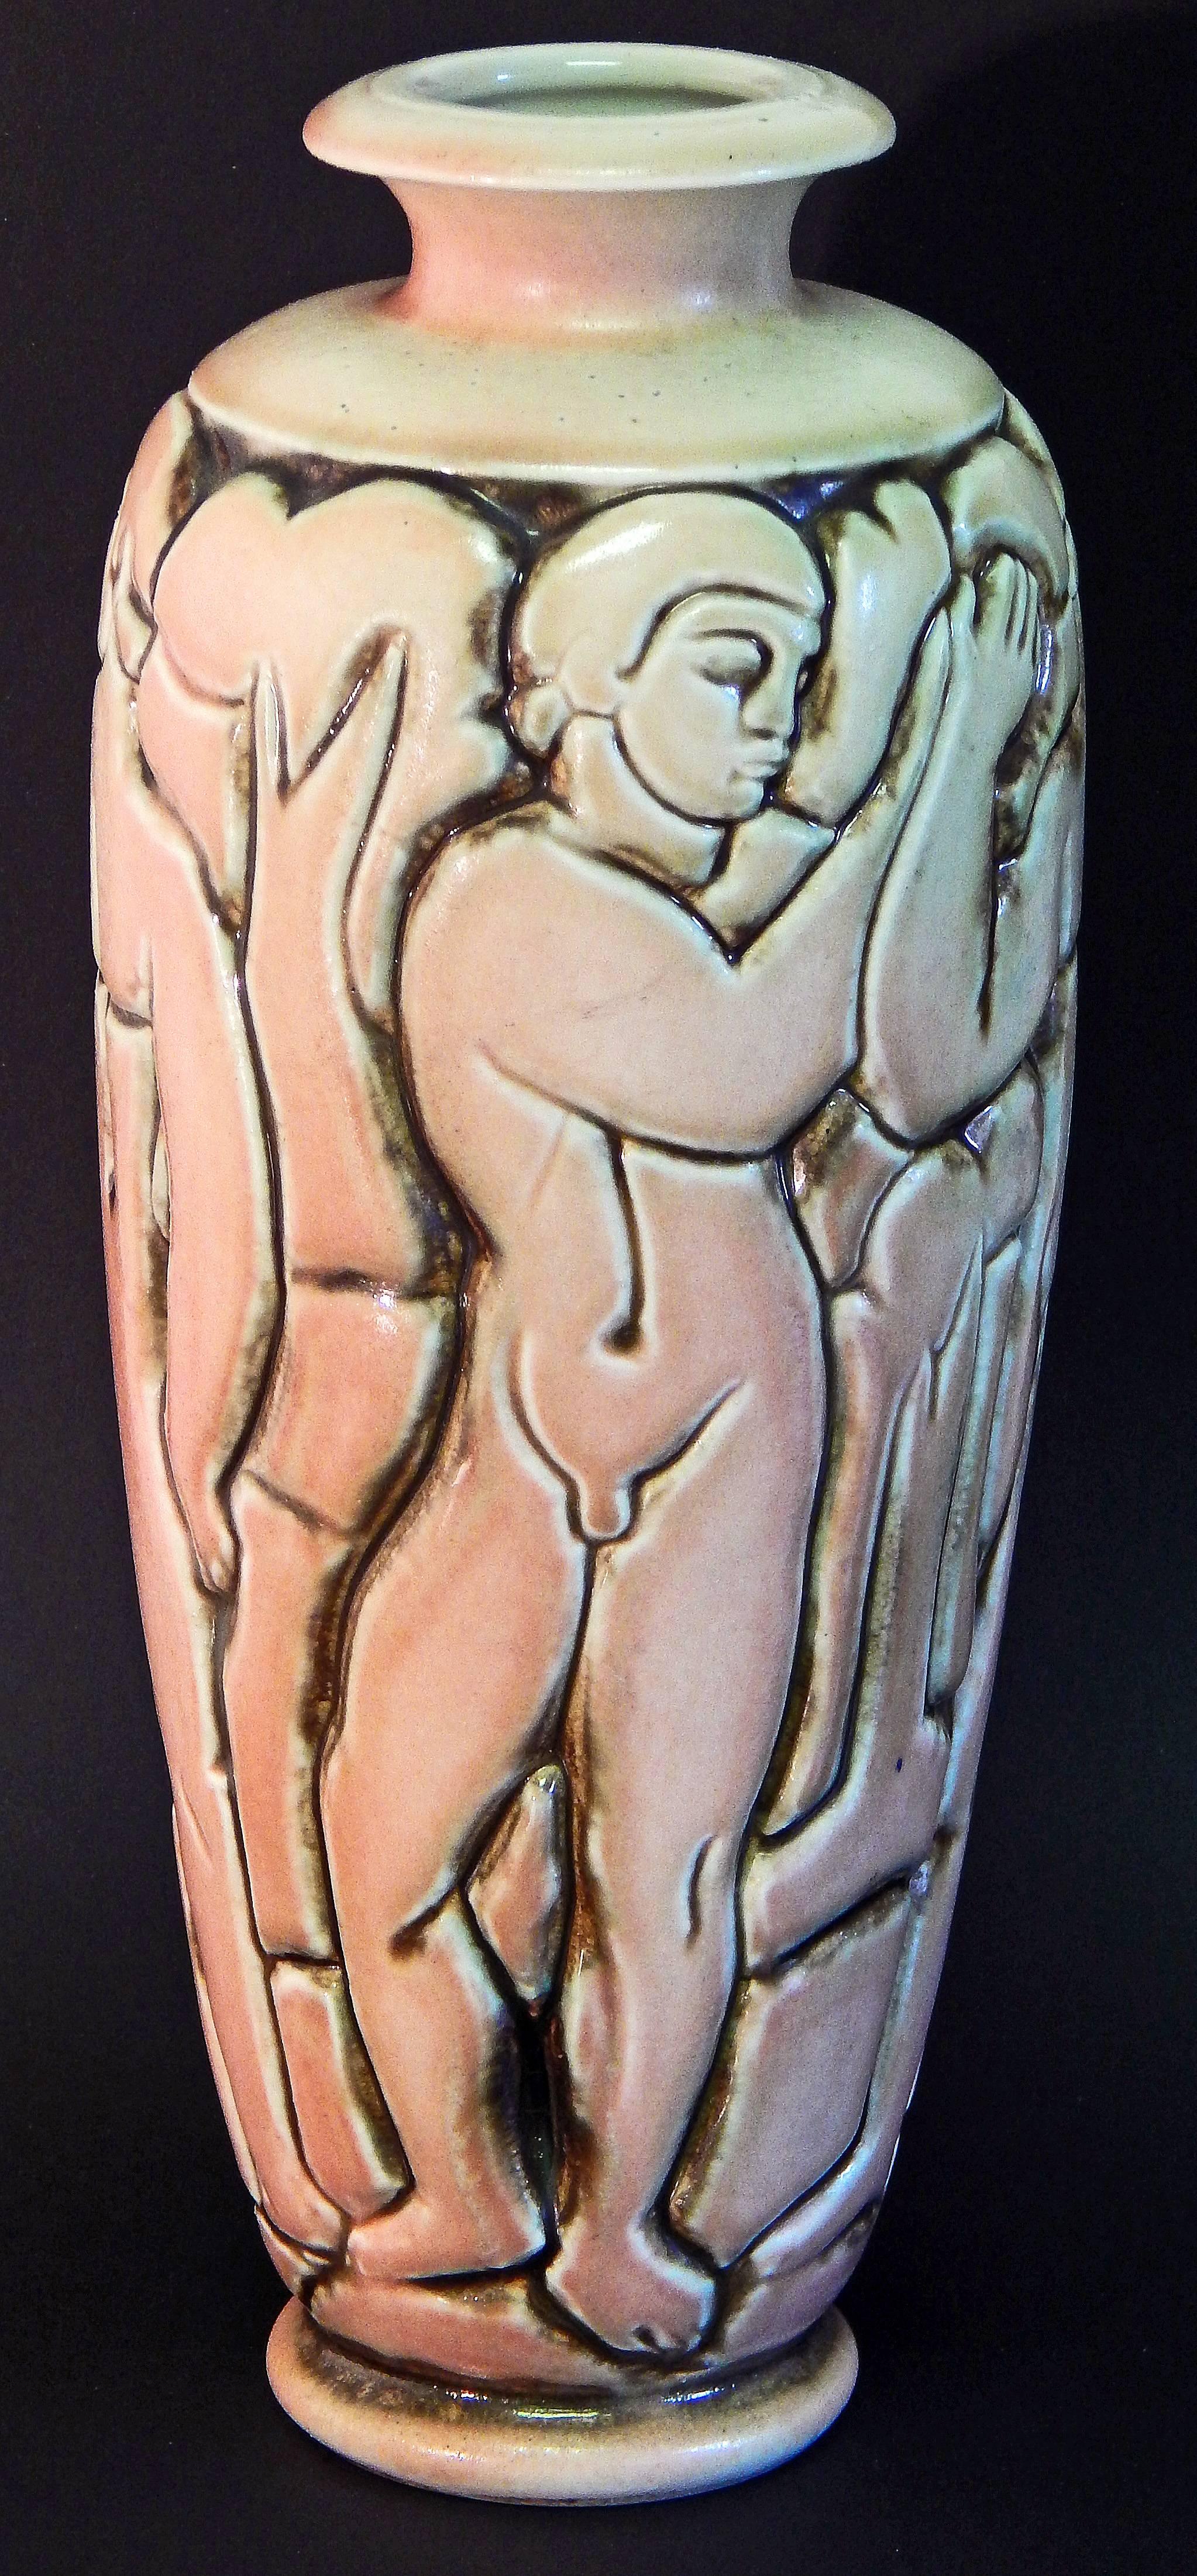 One of the most striking -- and rare -- vases ever produced by the Mougin ceramics firm in France, this vase ringed by four nude male figures clasping hands was sculpted by Gaston Goor. The artist was famous for illustrating a number of books by